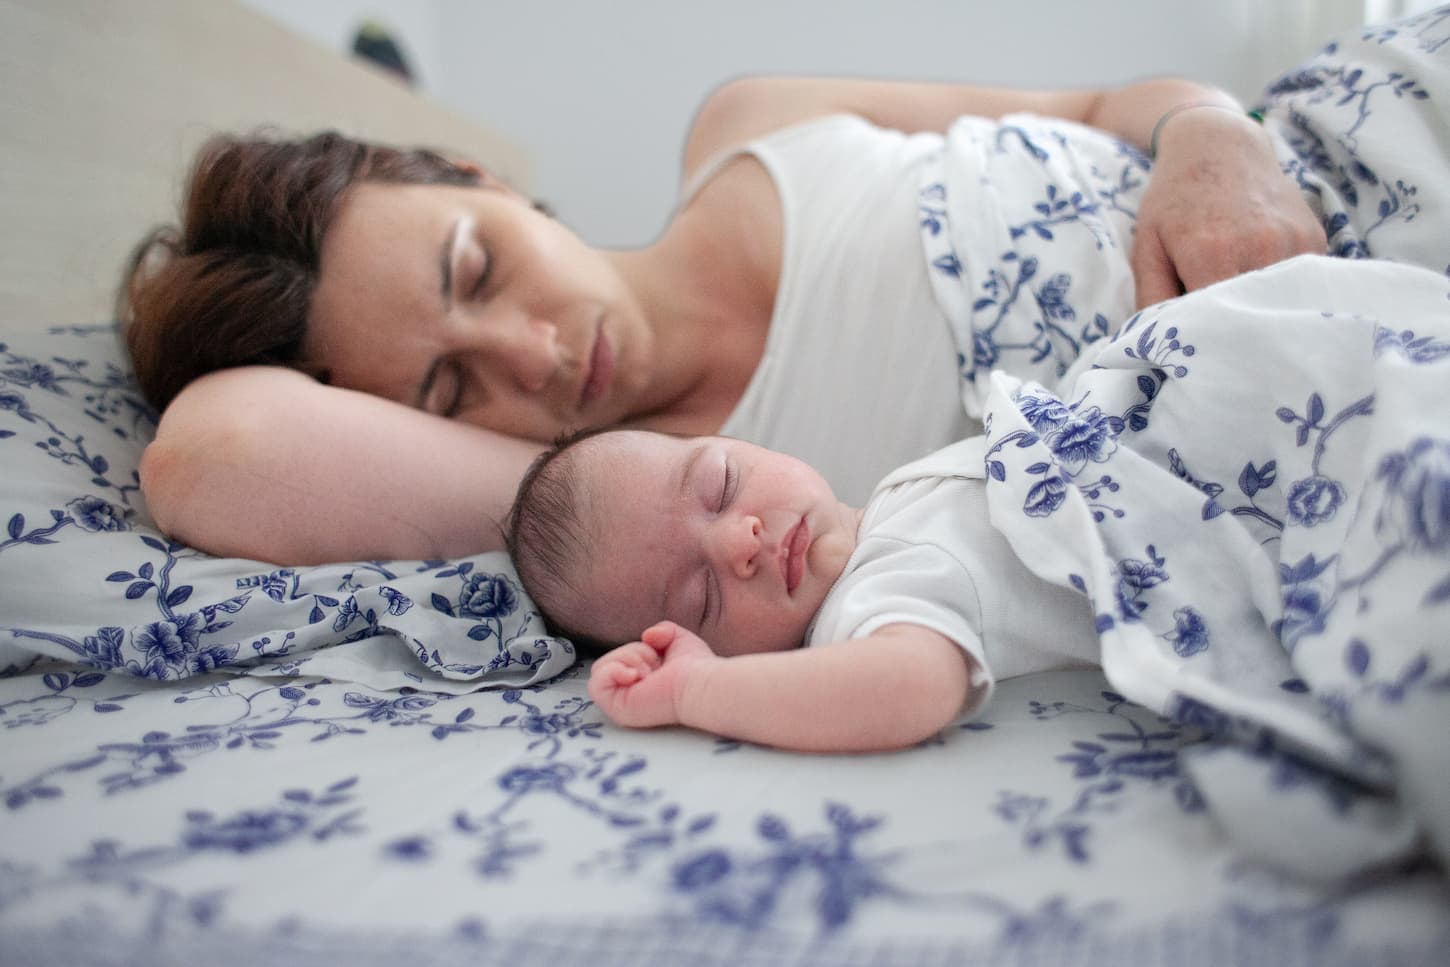 An image of a young mother sleeping with her baby on the bed.